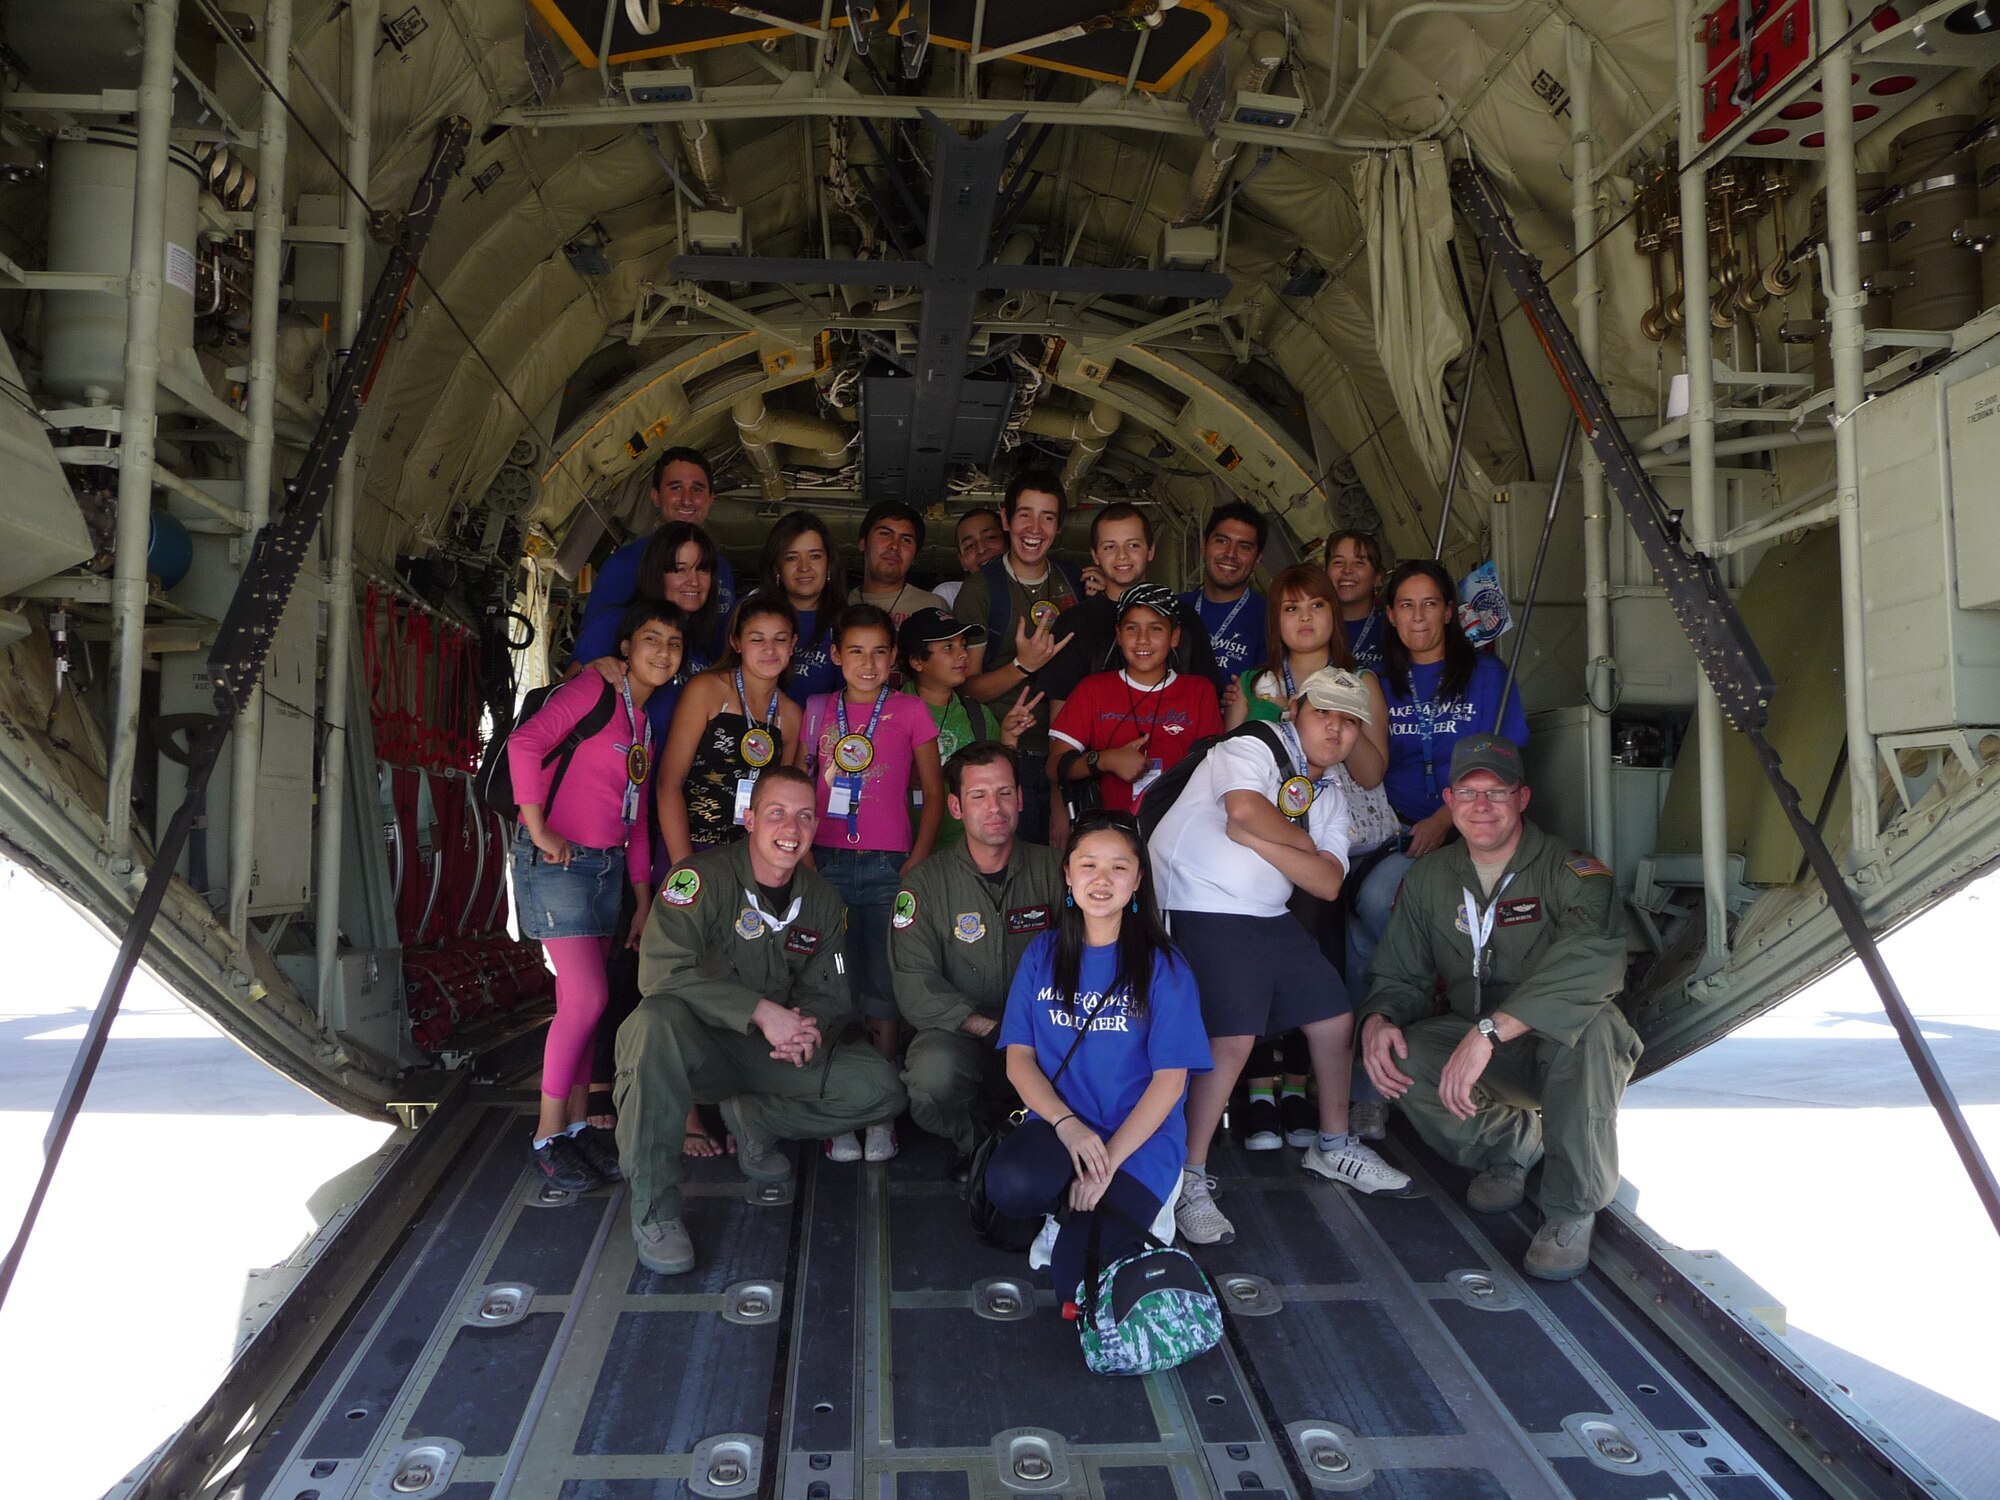 SANTIAGO, Chile -- Children from the Make a Wish Foundation, a charitable organization dedicated to assisting disabled and ill children around the world by creating once-in-a-lifetime memories, pose with members of the Texas Air National Guard during the FIDAE air and trade show in Santiago, Chile.  The group toured Air Force displays, sat in the cockpit of cargo aircraft and met with Airmen for several hours during the international event.  Airmen were so moved by their interaction with the young VIPs, at the conclusion of the show, the Air Force delegation made a personal donation to the Make a Wish program.